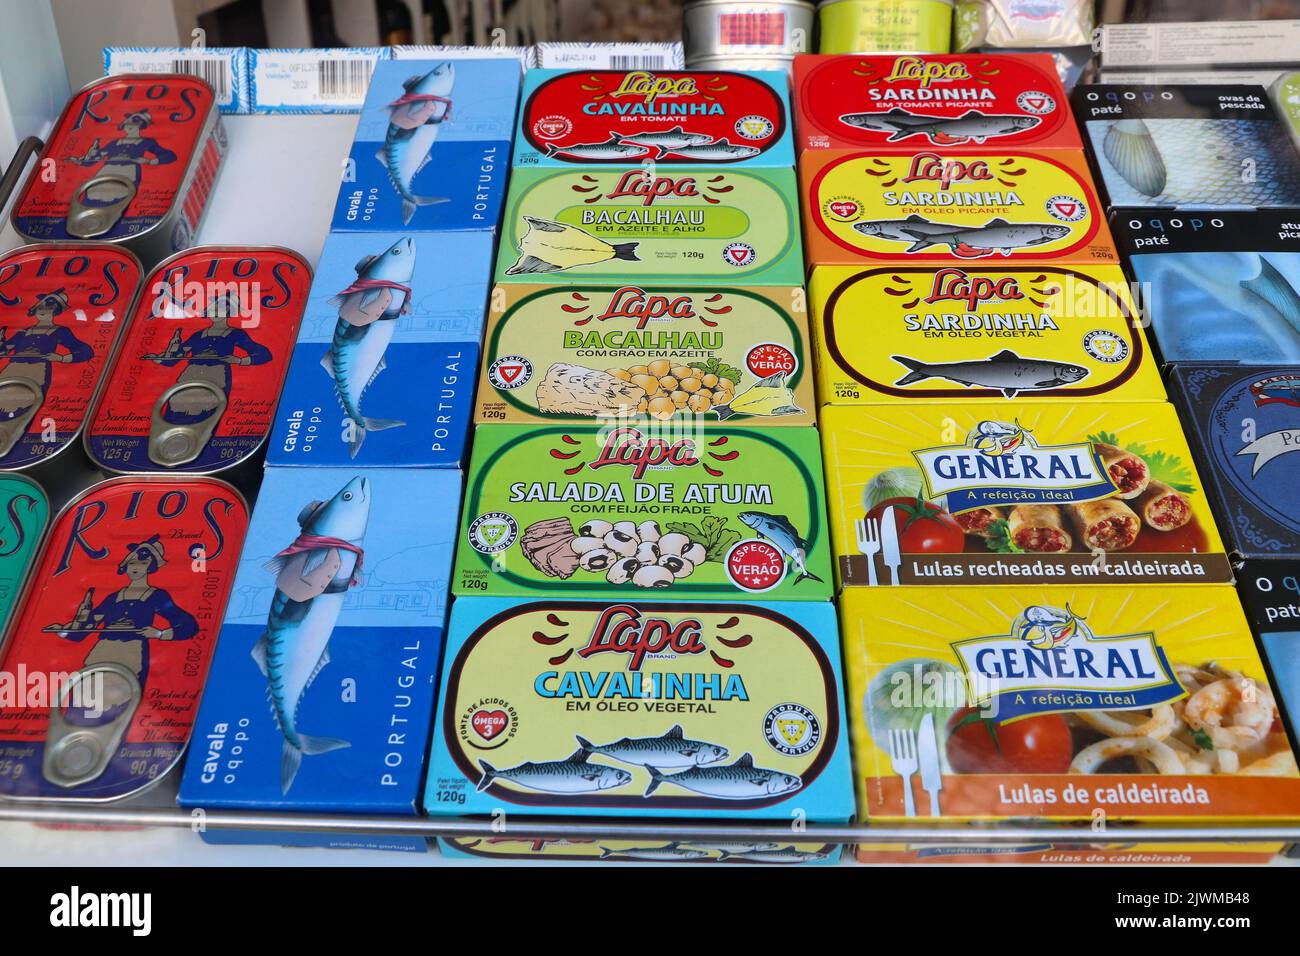 AVEIRO, PORTUGAL - MAY 23, 2018: Shop display with canned sardines and other fish in Aveiro. Tinned fish is  part of traditional Portuguese cuisine si Stock Photo